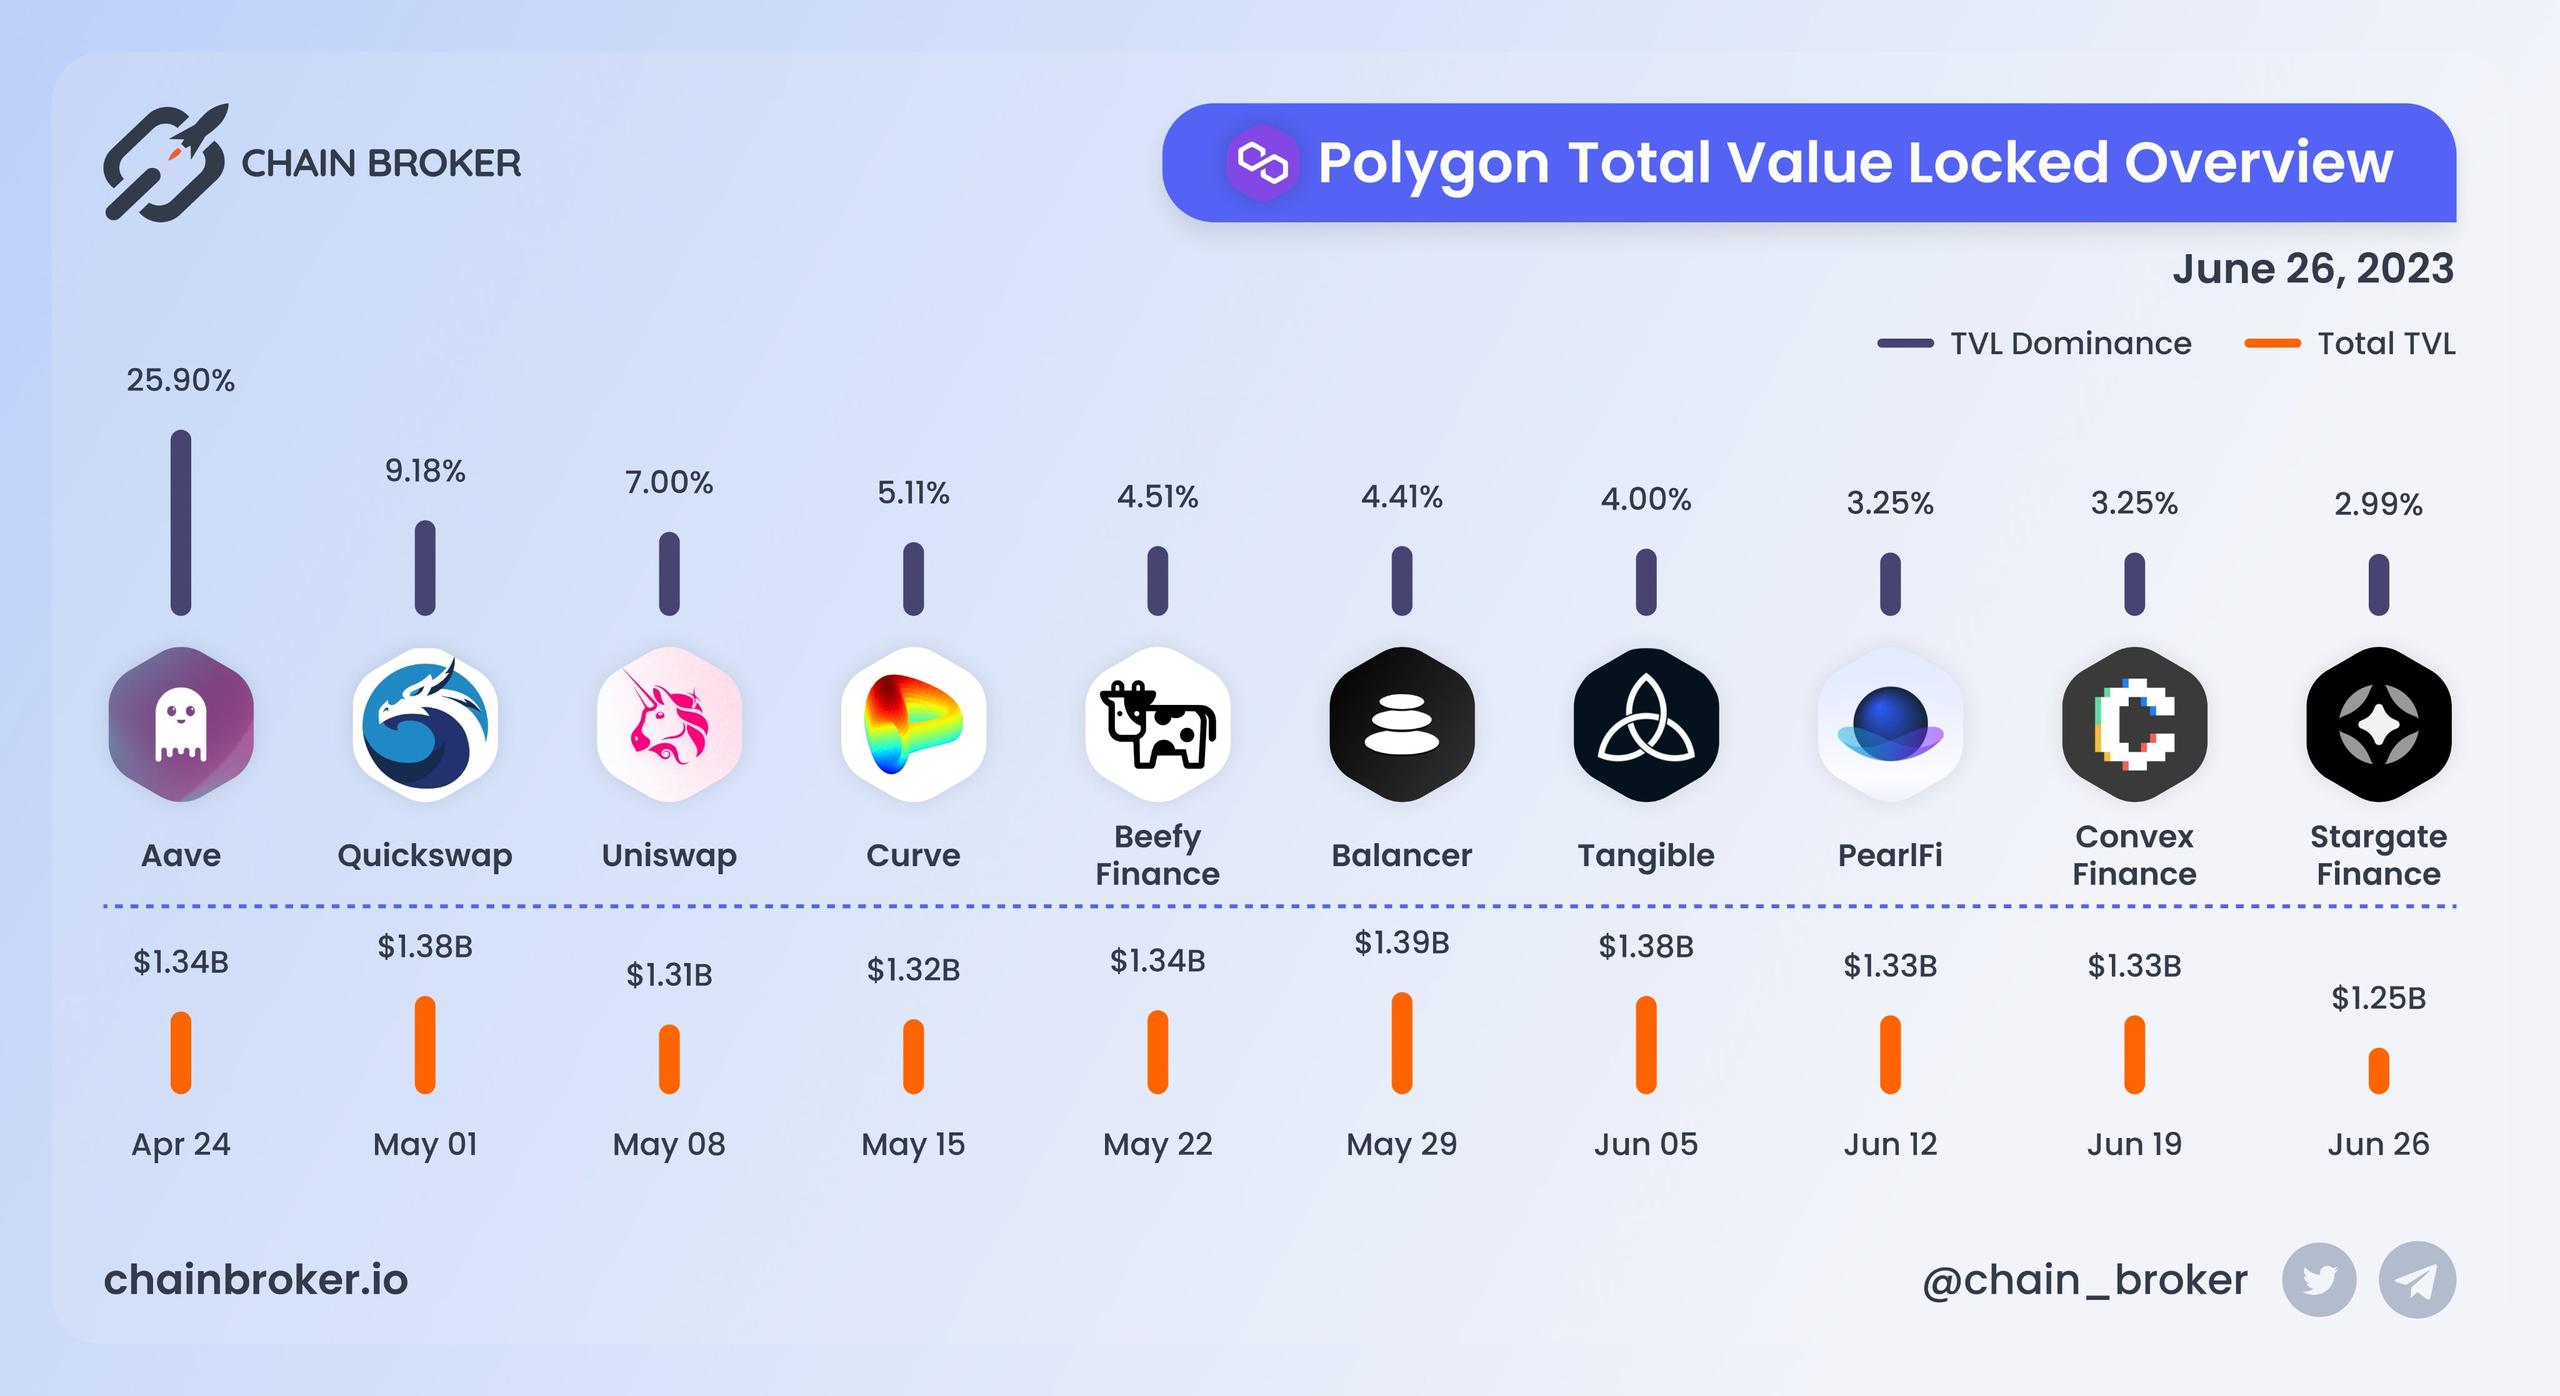 Polygon total value locked overview